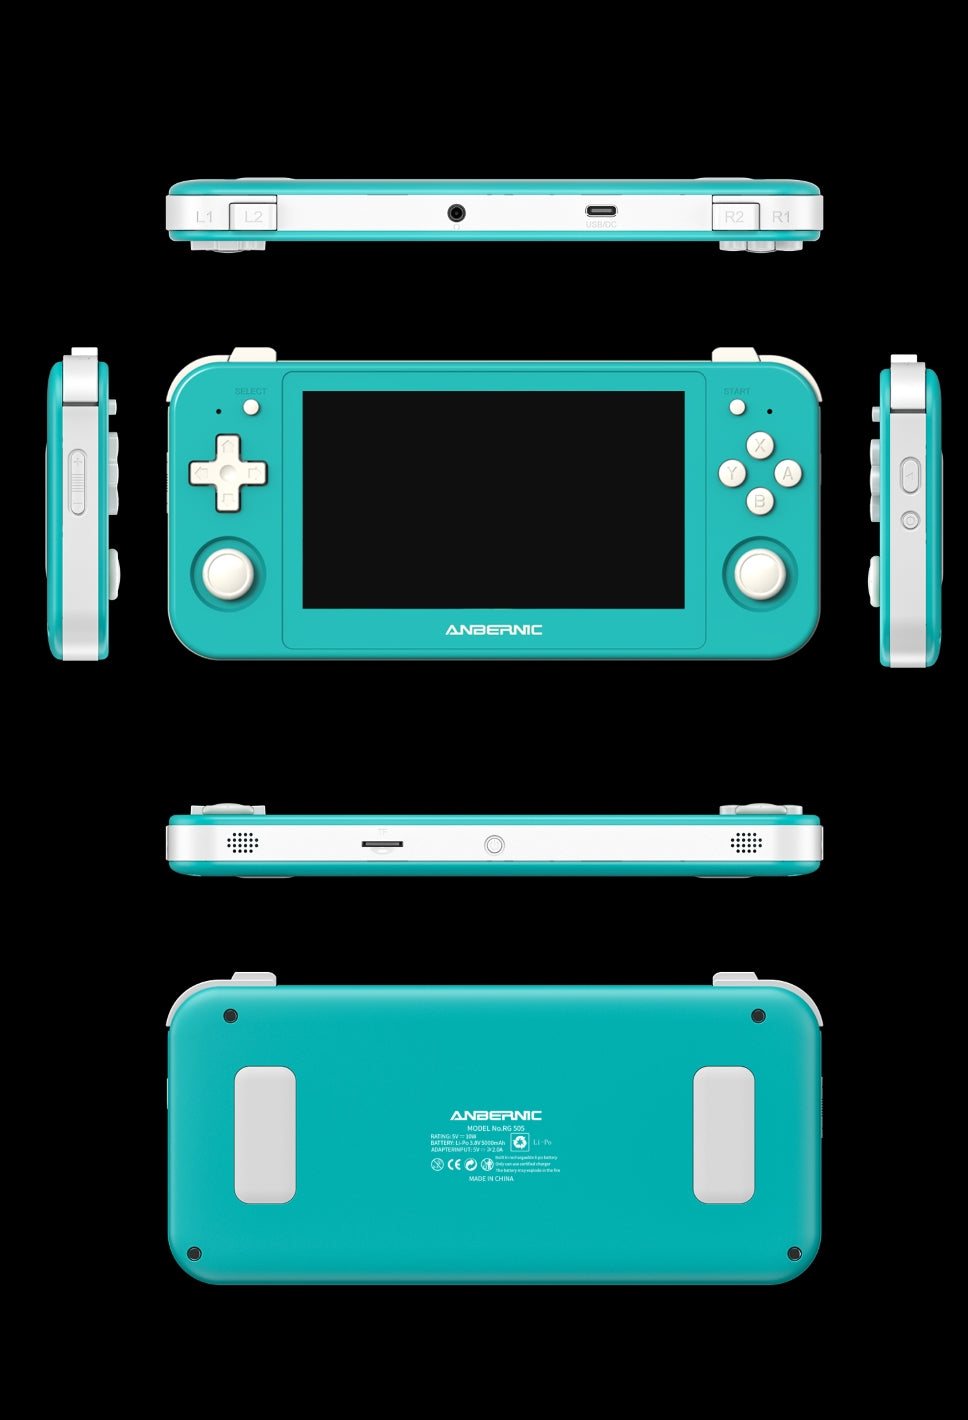 Anbernic RG505 in a unique and vibrant turquoise colour.